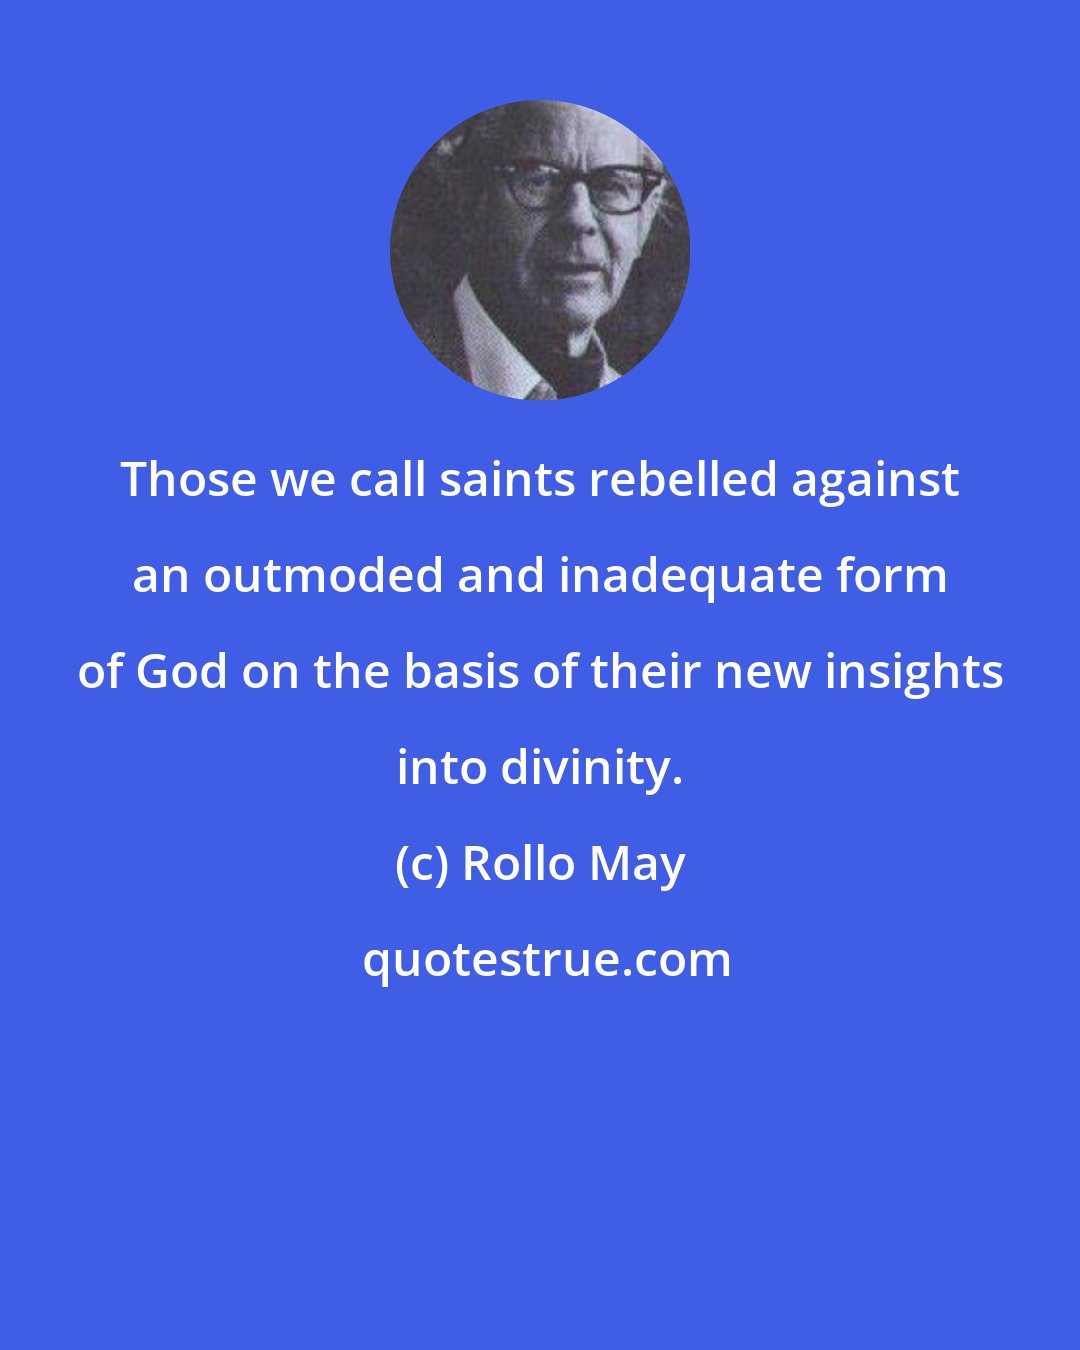 Rollo May: Those we call saints rebelled against an outmoded and inadequate form of God on the basis of their new insights into divinity.